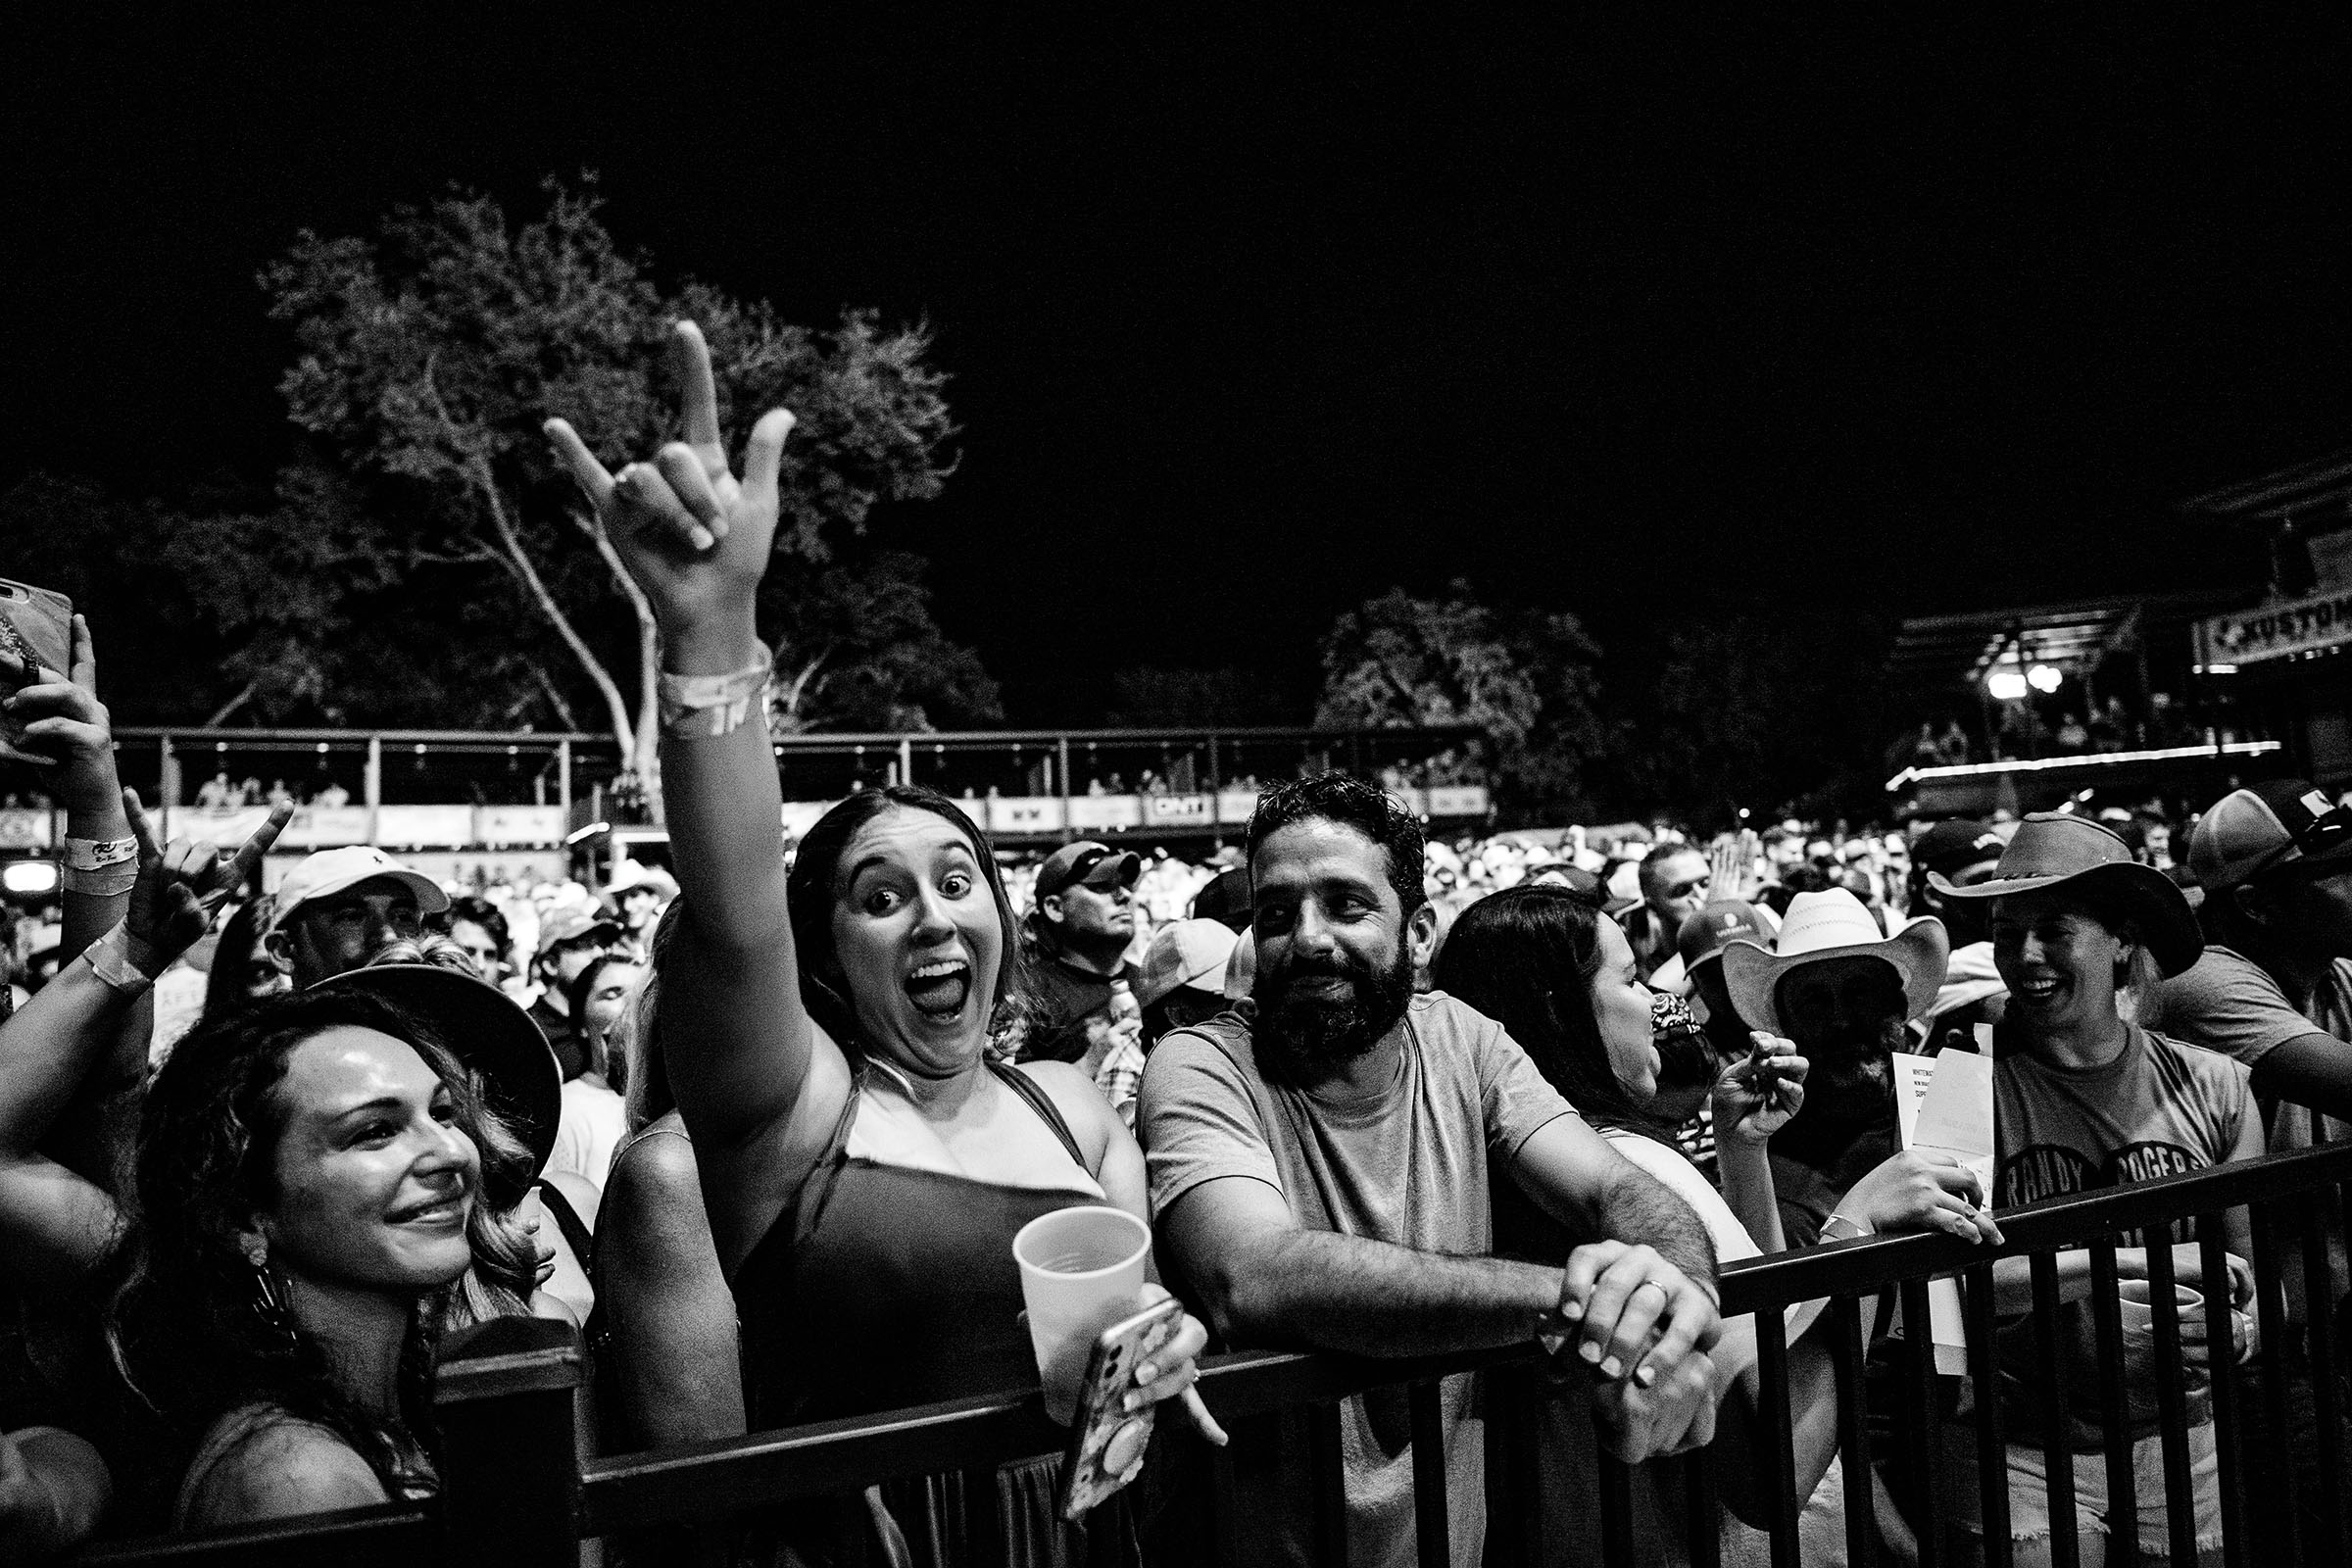 A woman puts her hand up in the air with a large smile in a group of people attending a concert